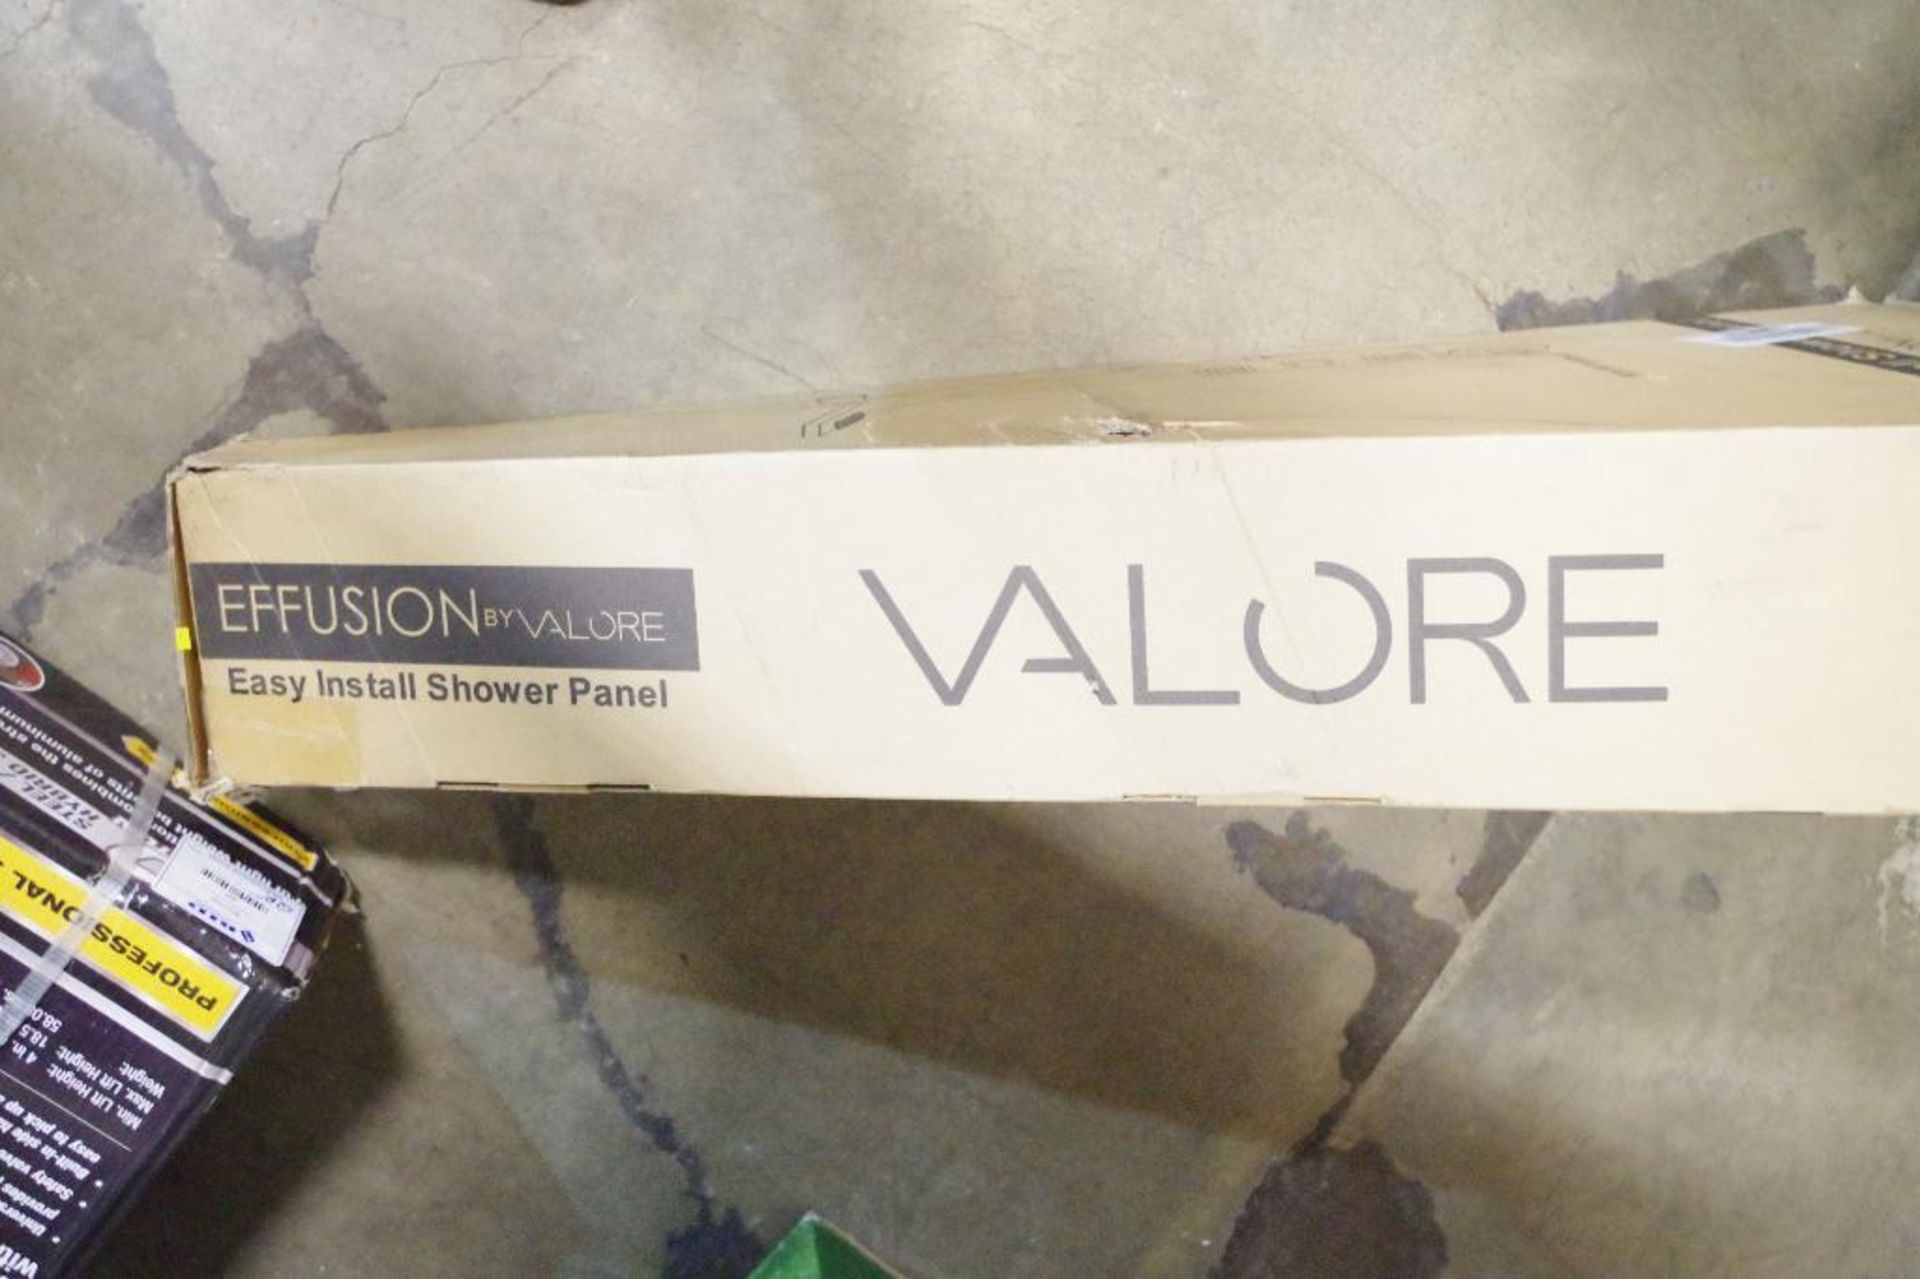 NEW EFFUSION by VALORE Easy Install Shower Panel - Image 3 of 3